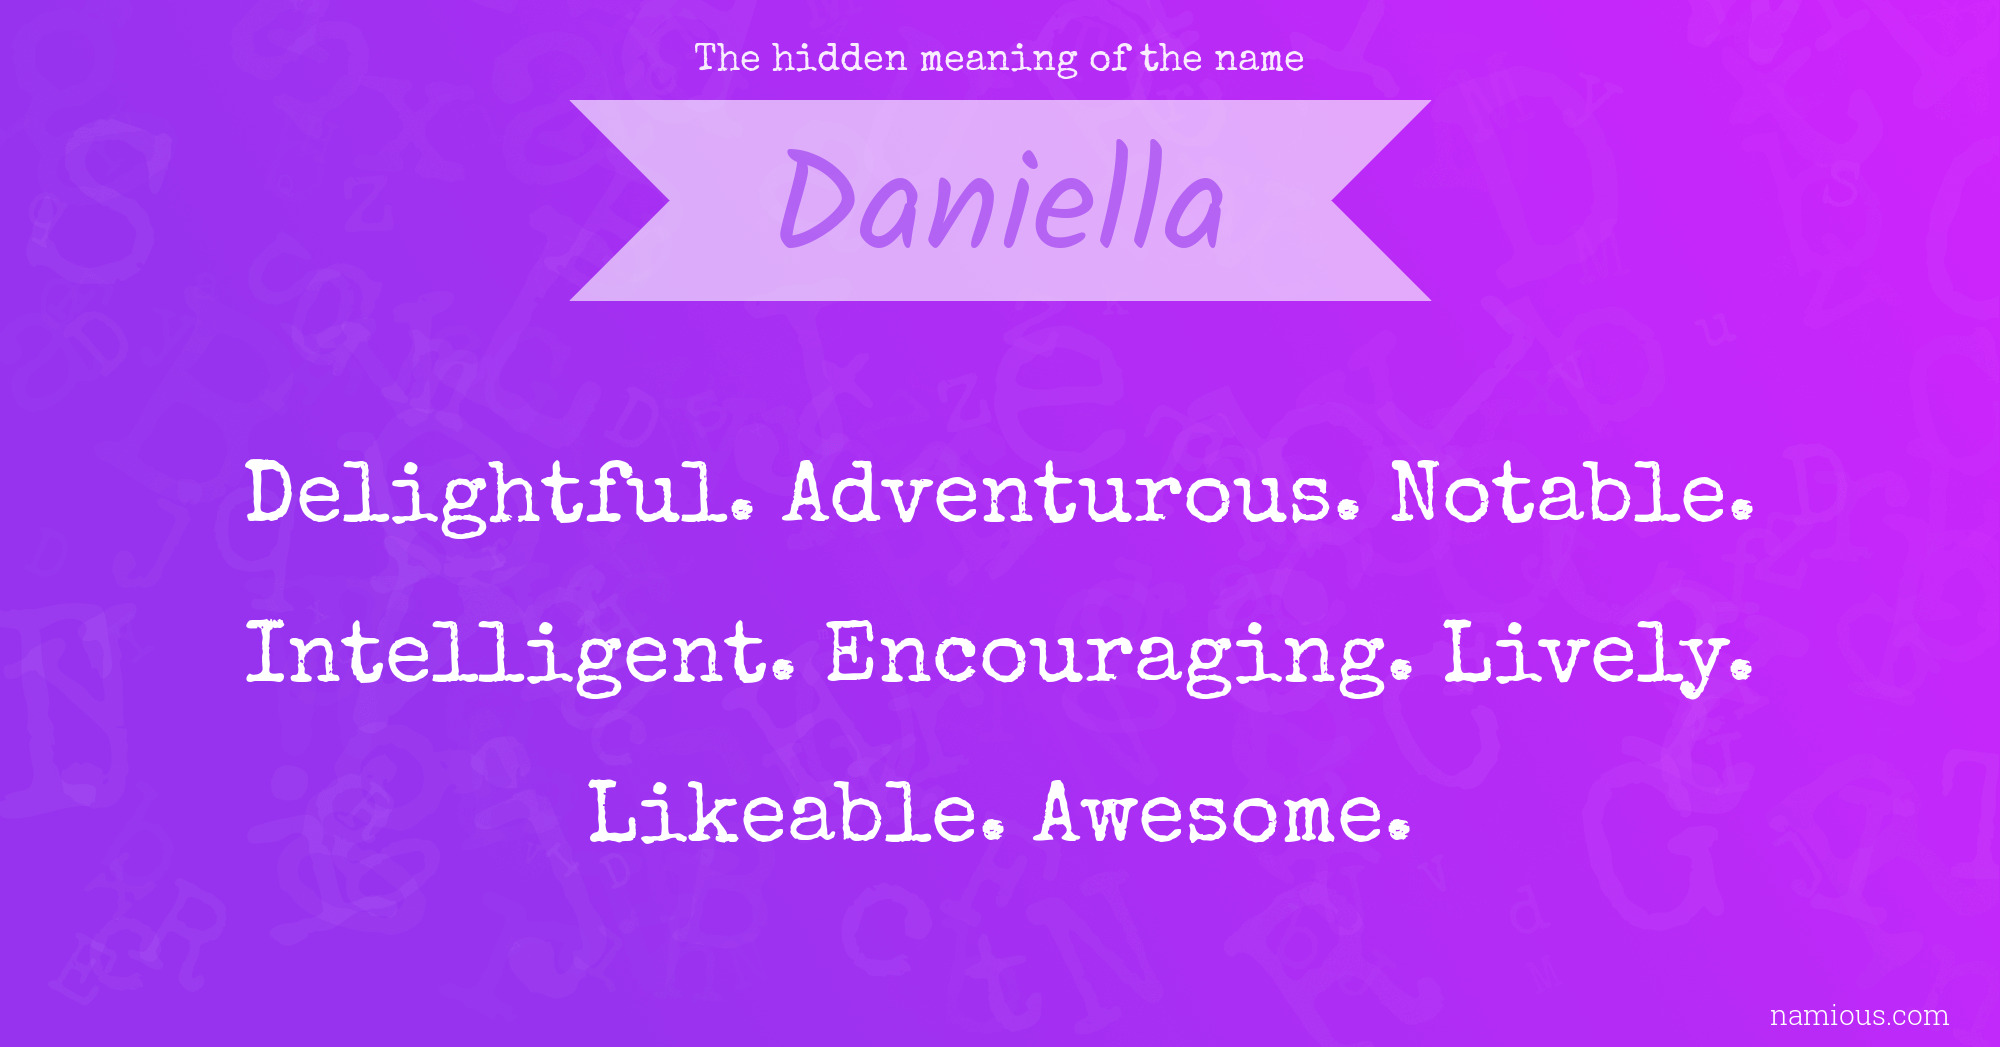 The hidden meaning of the name Daniella